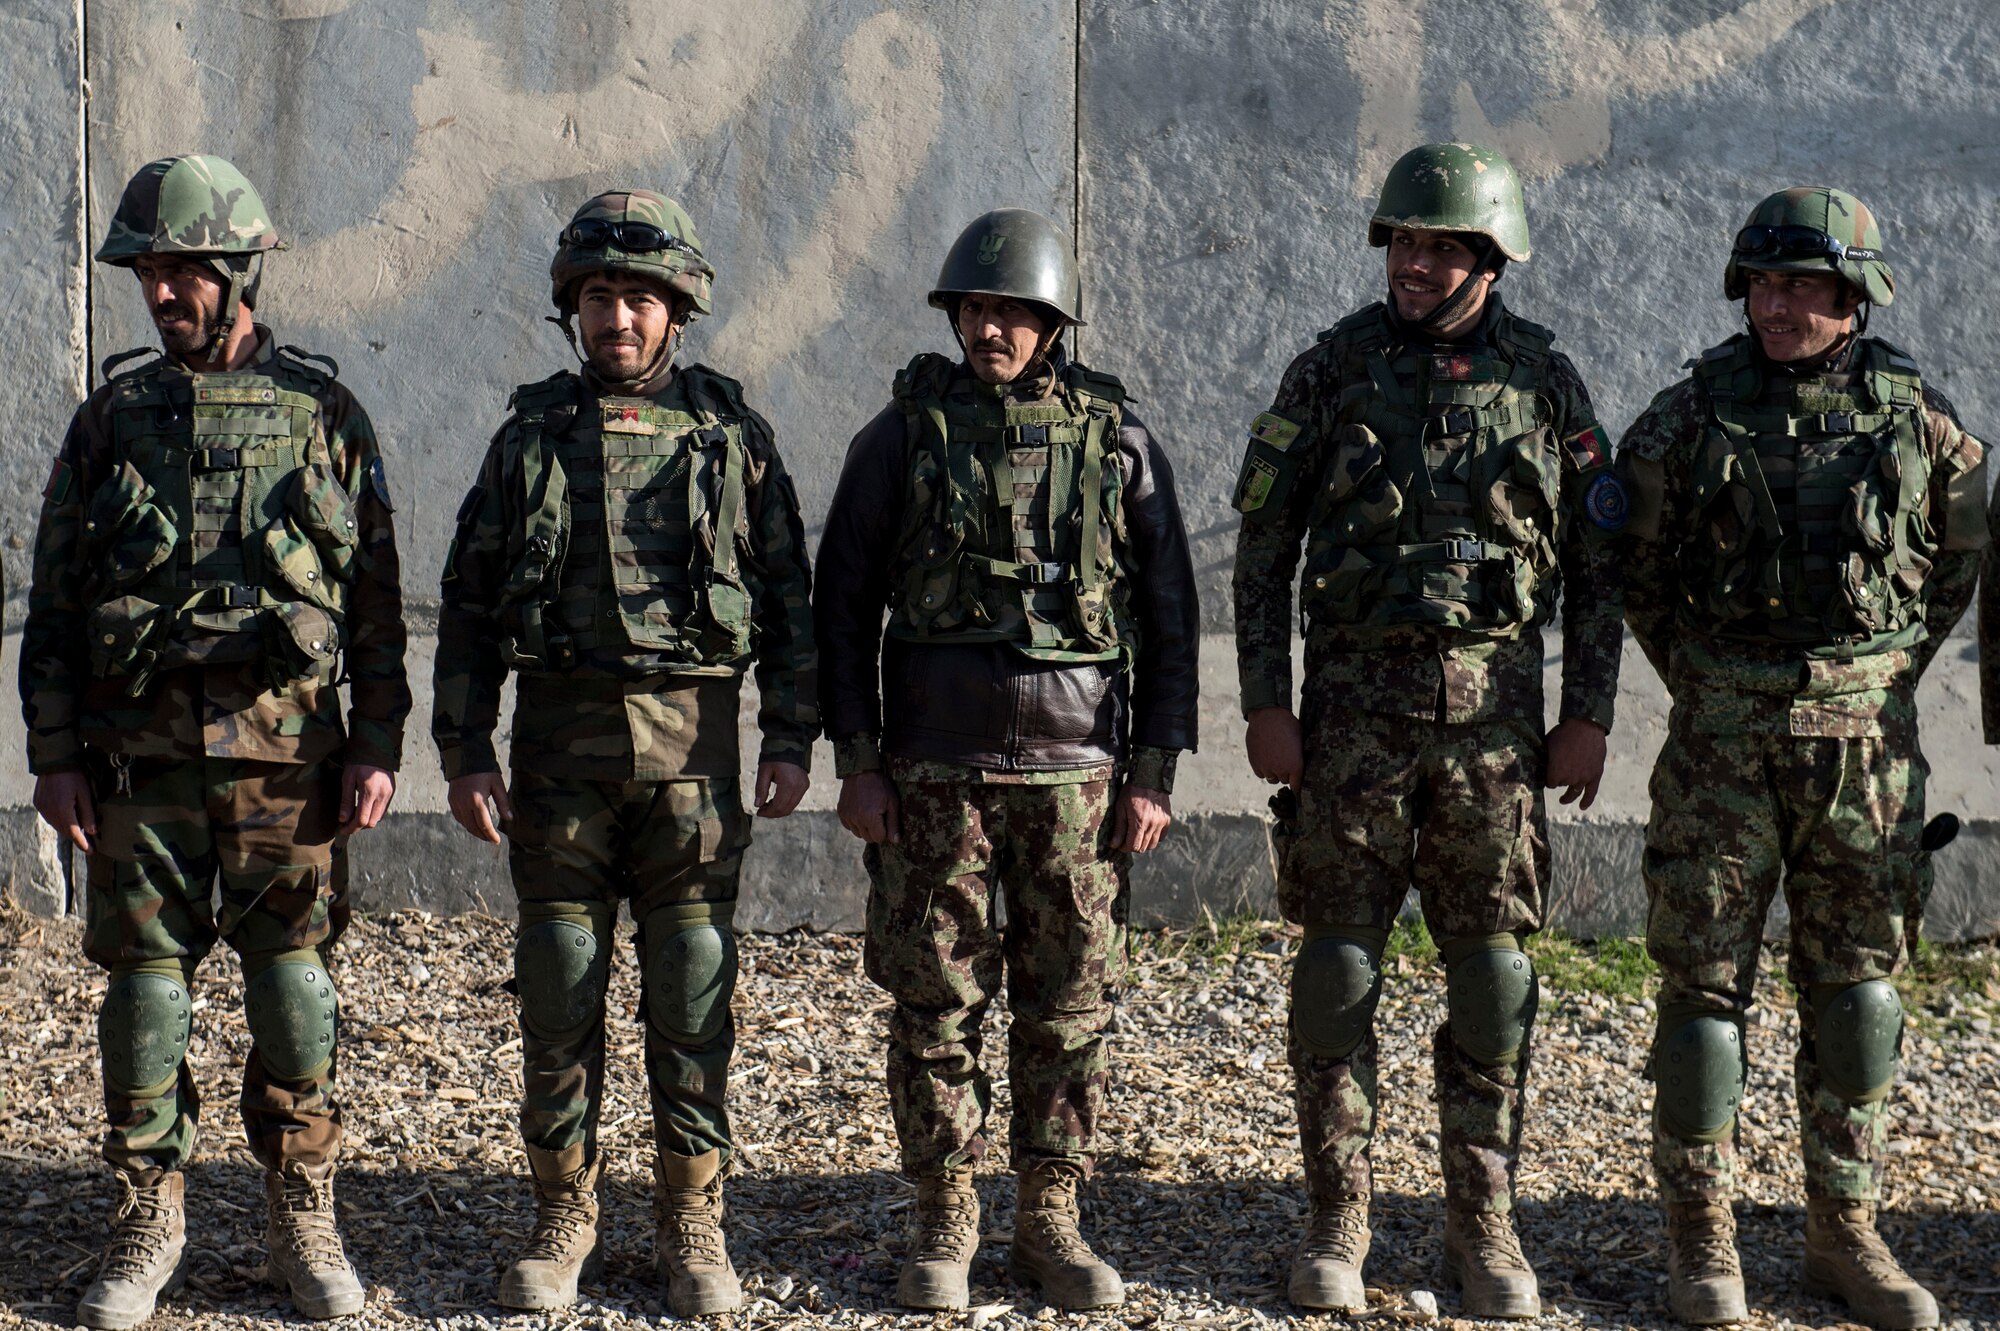 Afghan Air Force soldiers stand in formation near Forward Operating Base Oqab, Kabul, Afghanistan, Dec. 13, 2015. Train, Advise, Assist Command-Air (TAAC-Air) security forces advisors visit the Afghans at different security posts on base a couple times a week. (U.S. Air Force photo by Staff Sgt. Corey Hook/Released)